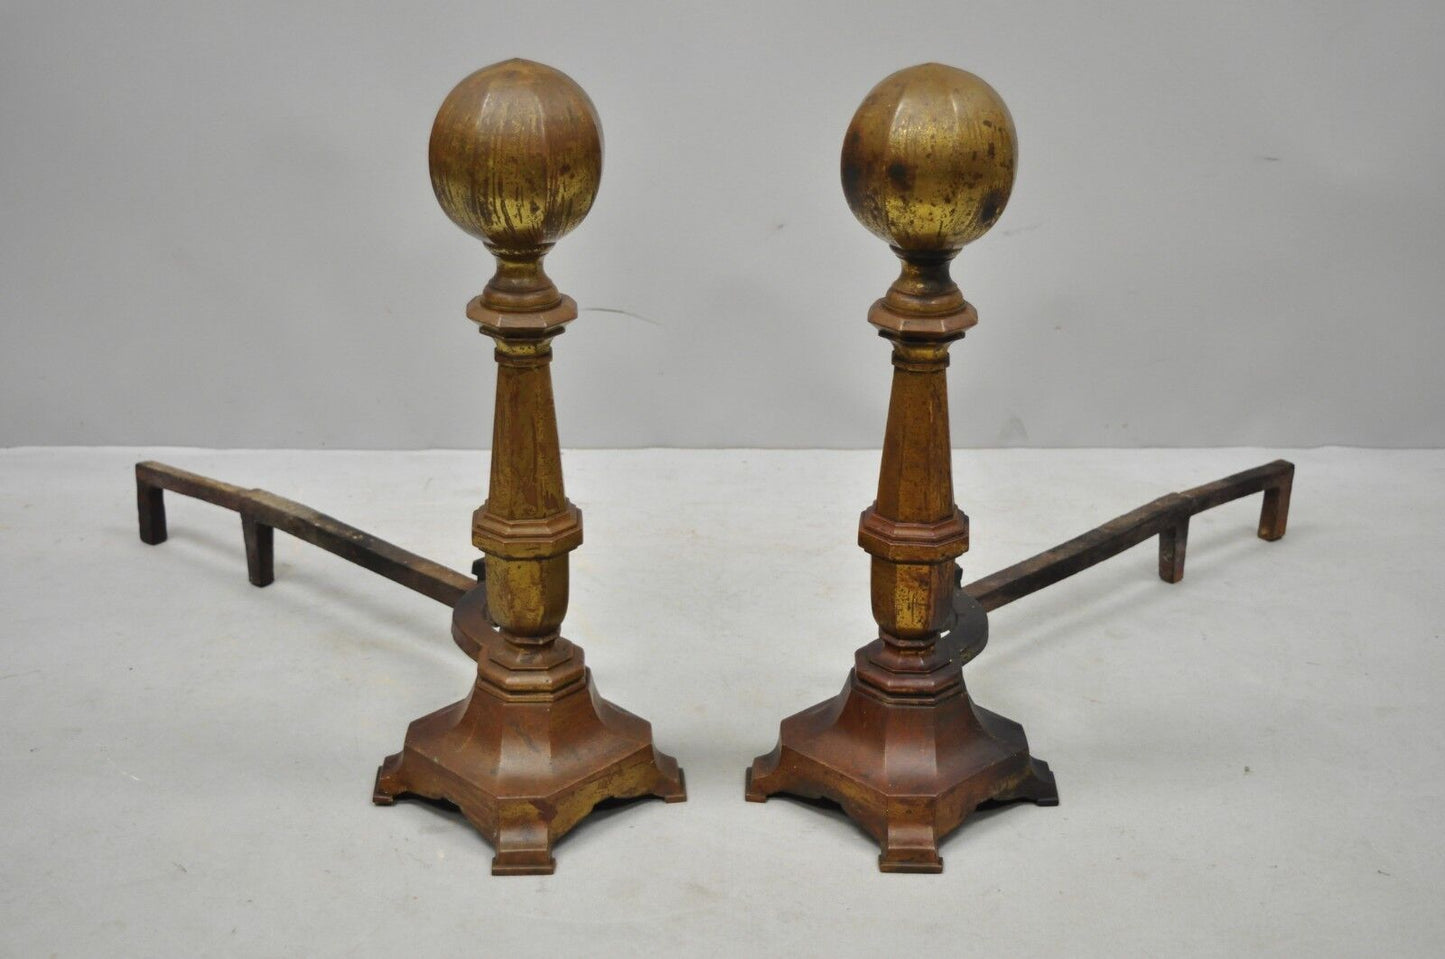 Pair of 19th Century American Federal Brass Cannonball Andirons w/ Aged Patina